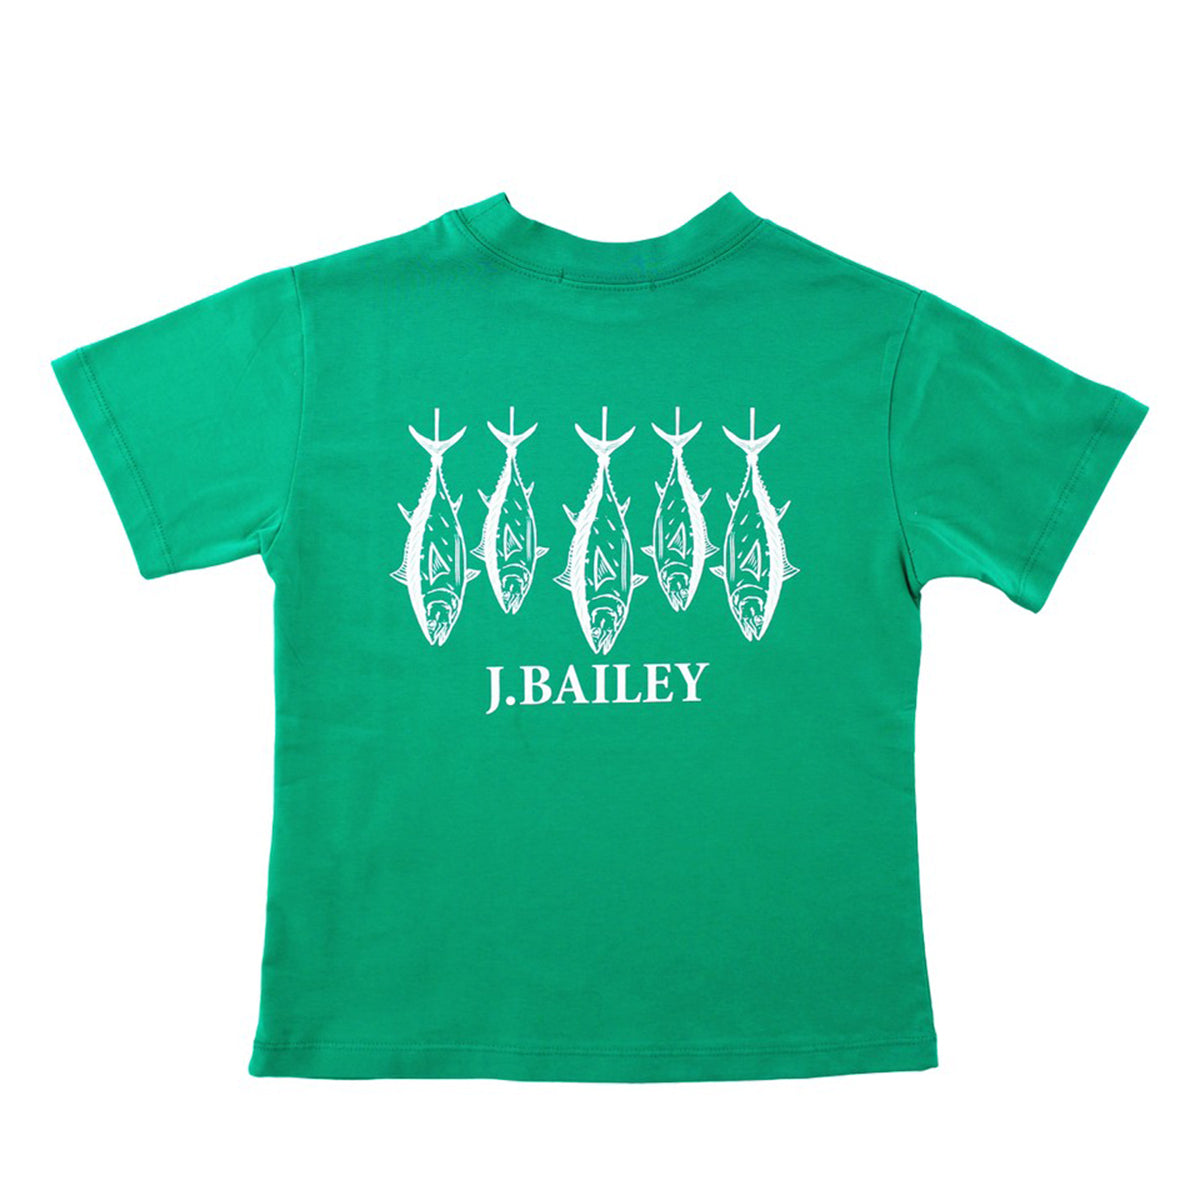 Toddler Boy's Fish on Kelly Green Logo T-Shirt by J. Bailey